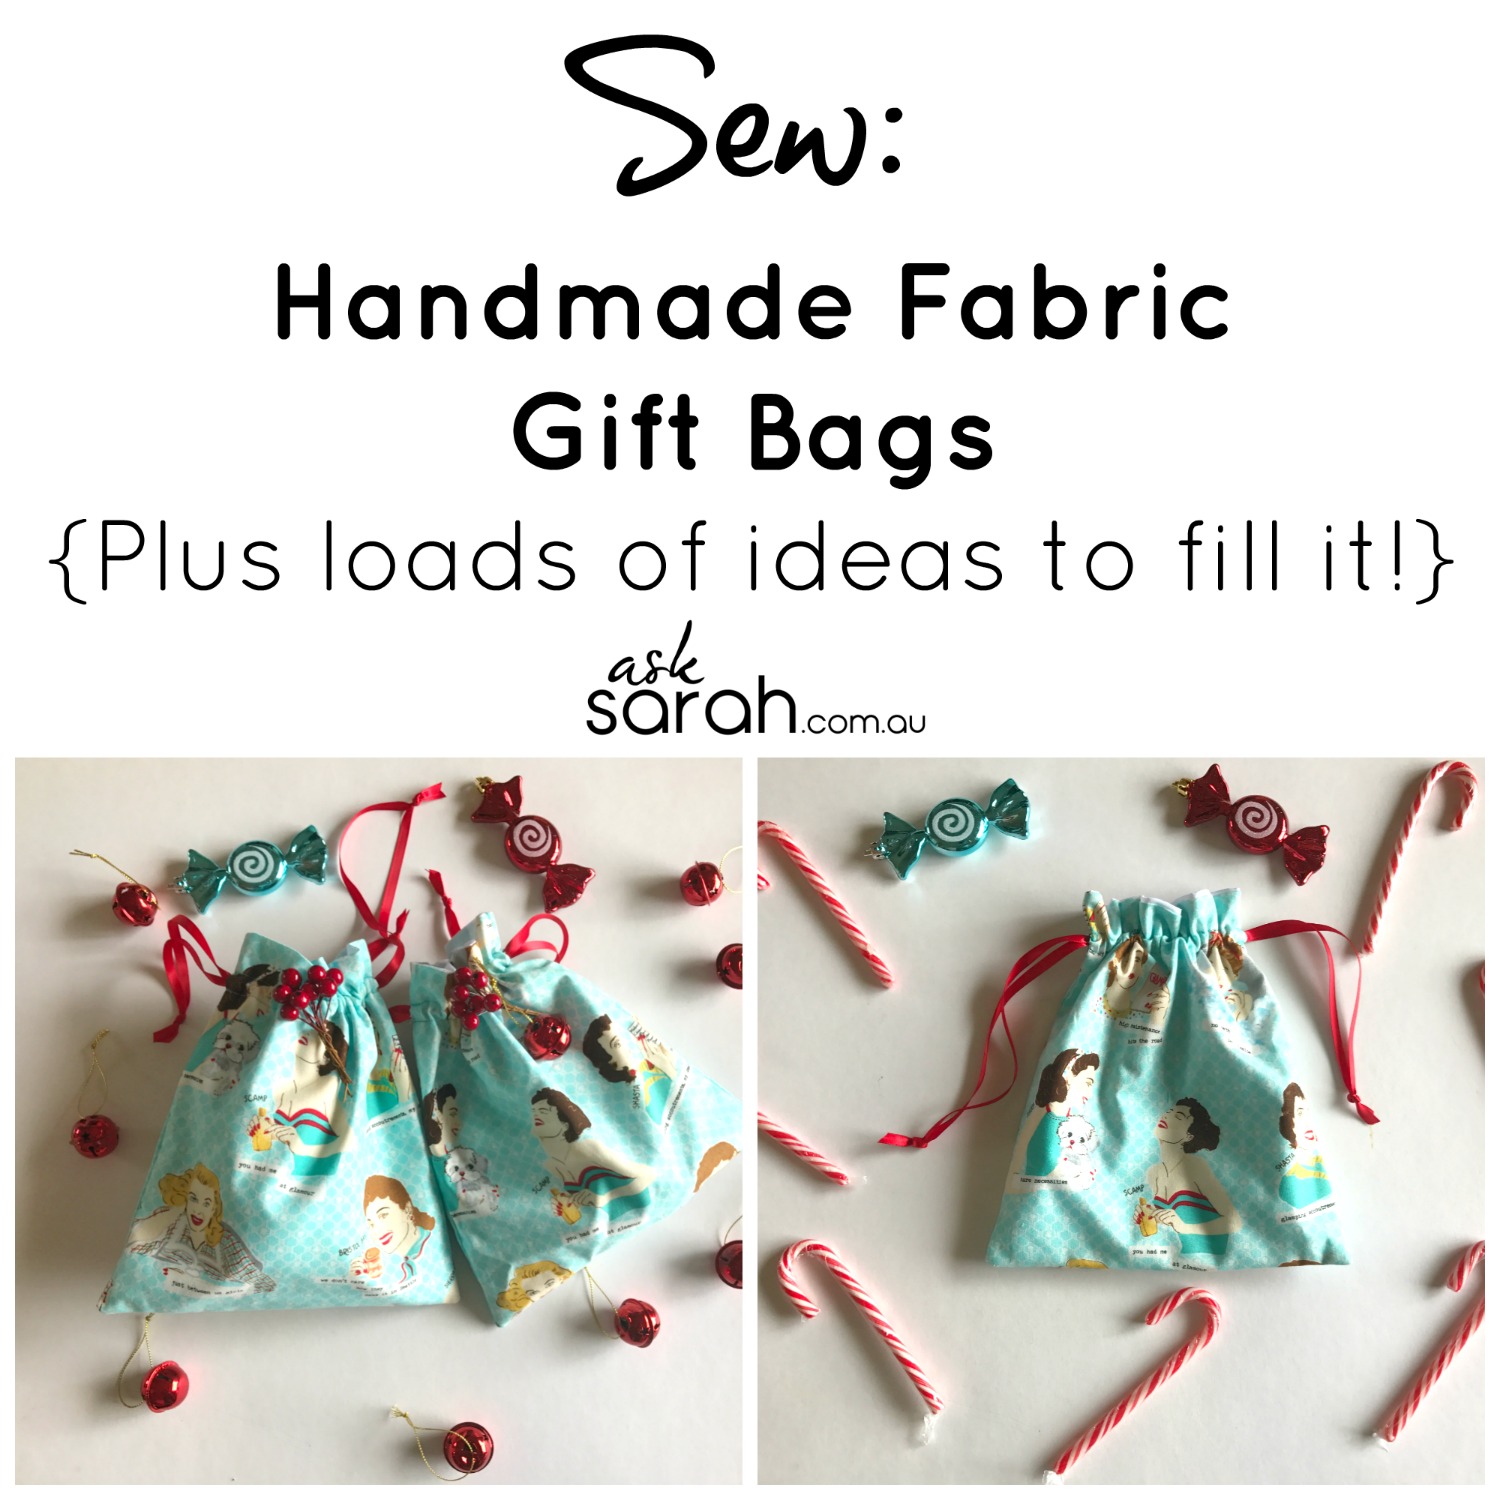 sew-handmade-fabric-gift-bags-plus-loads-of-ideas-to-fill-it